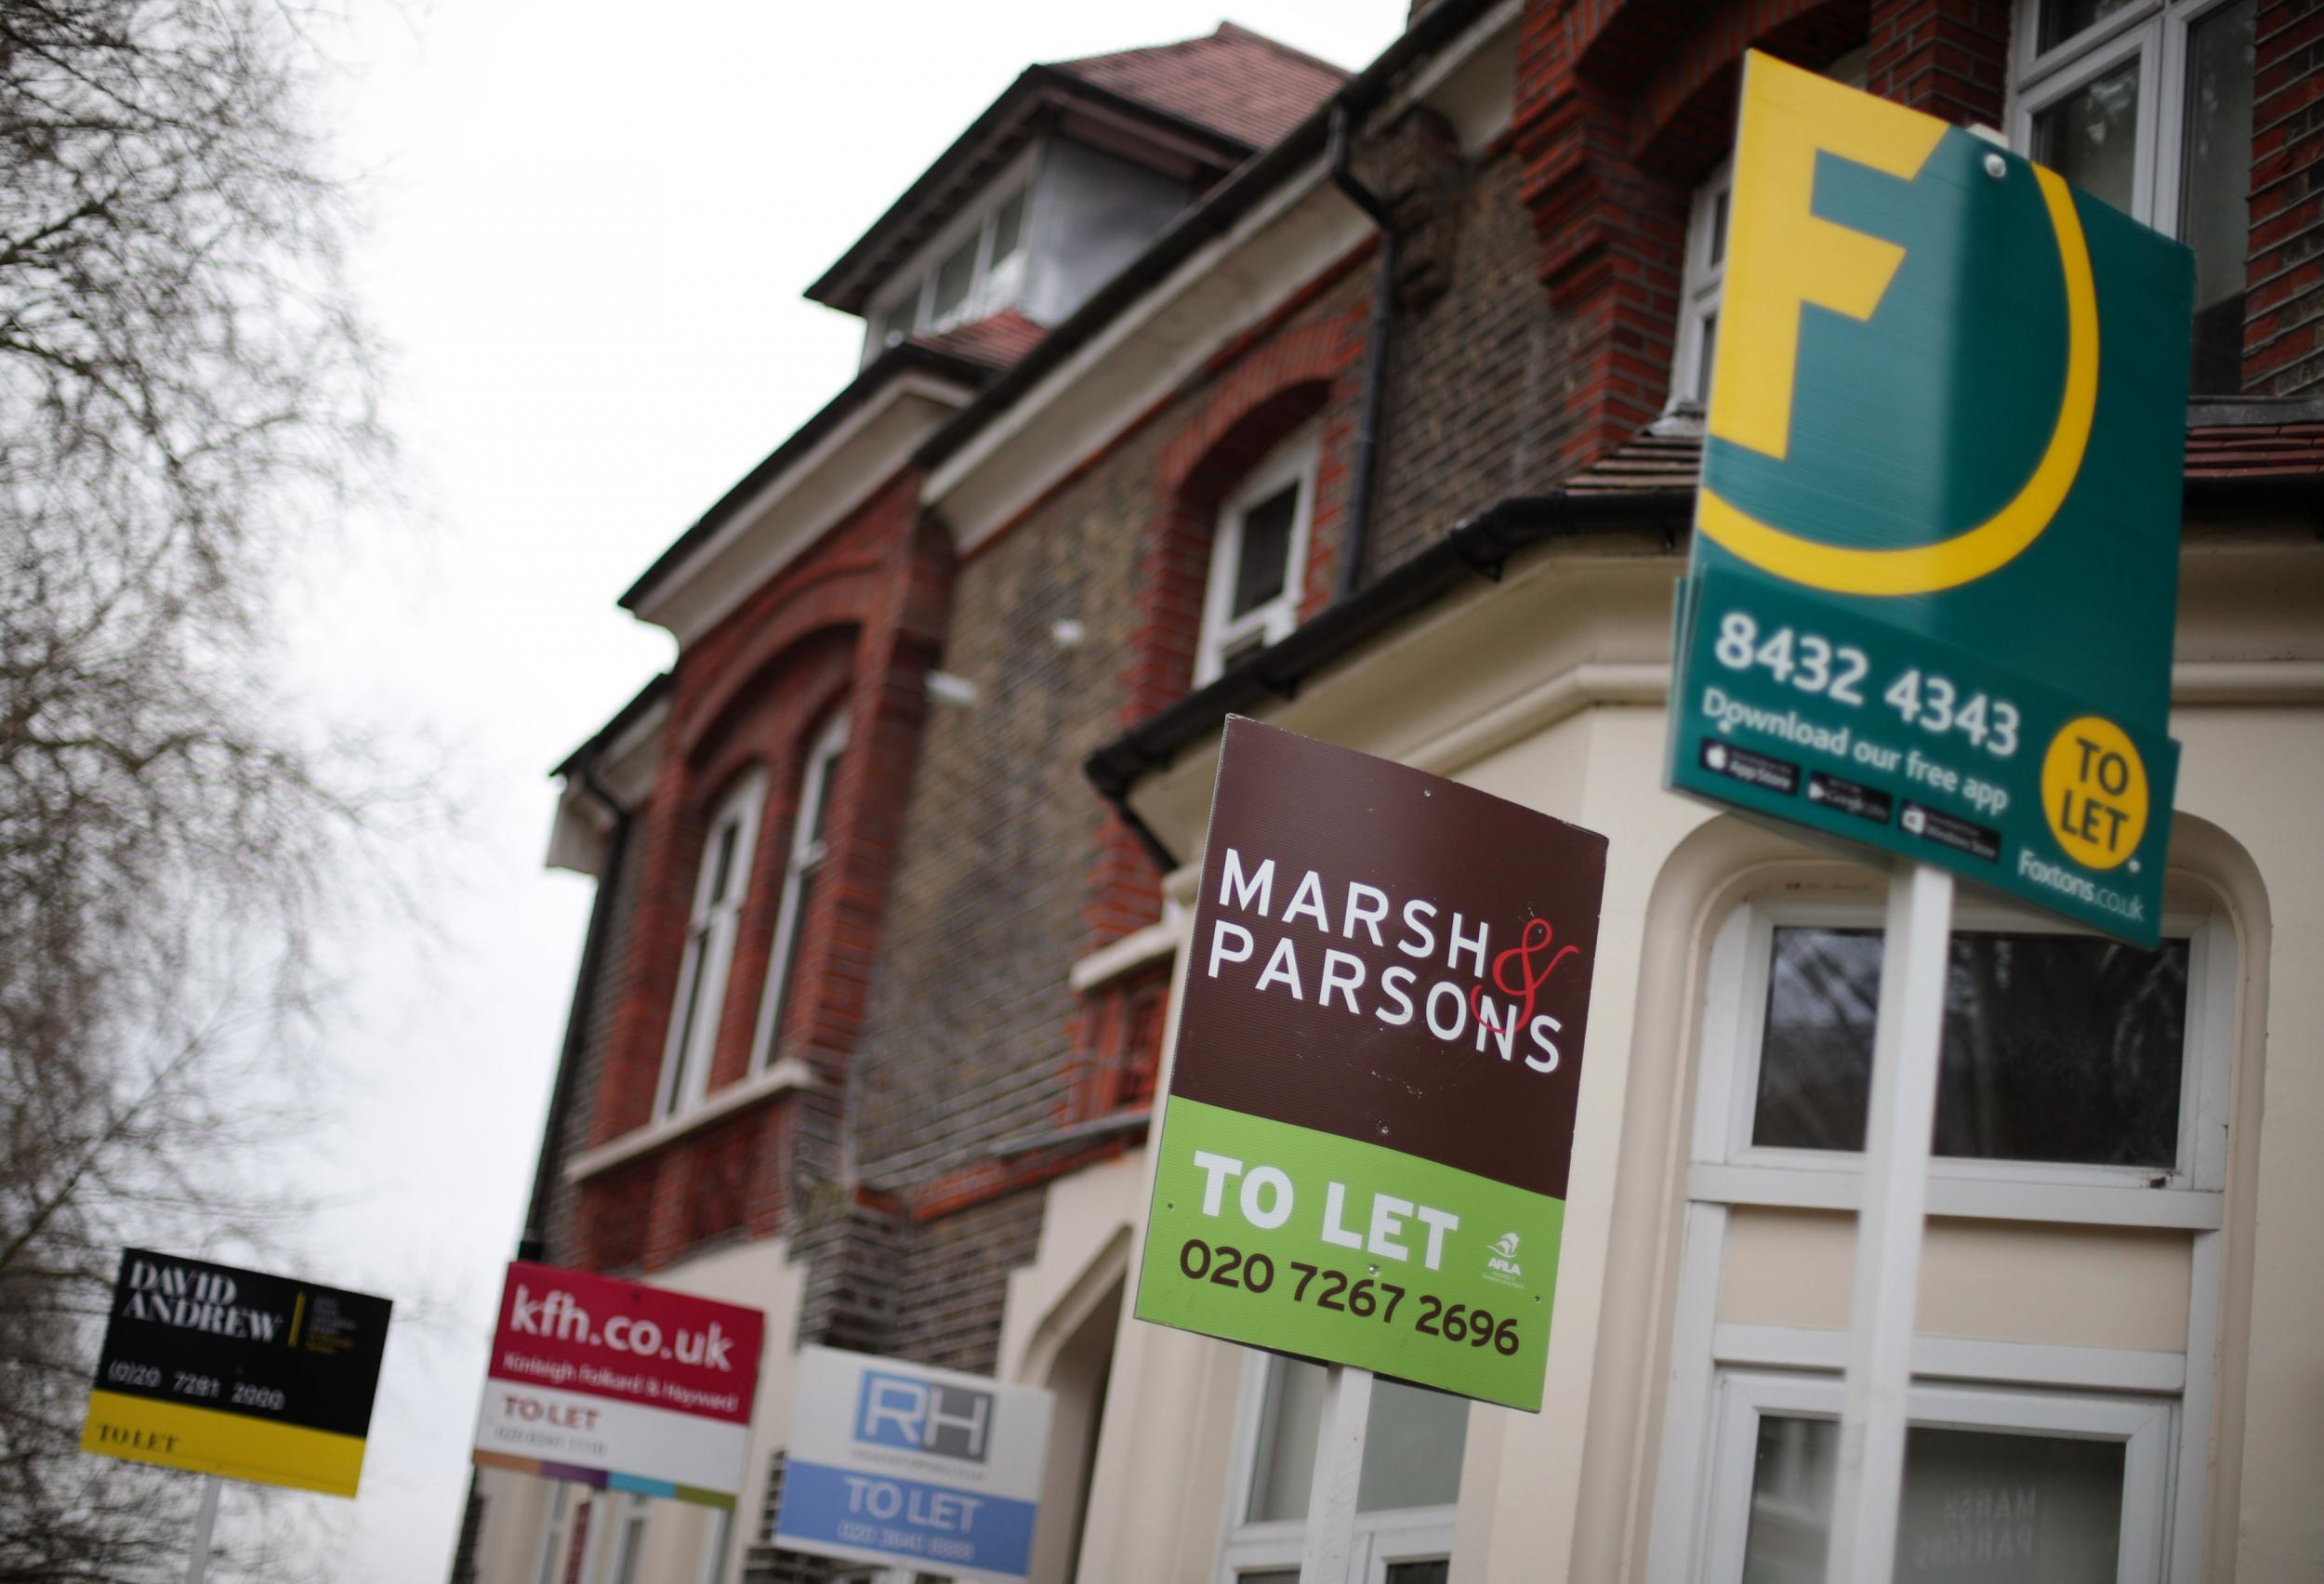 Protection is available for landlords and tenants during the crisis